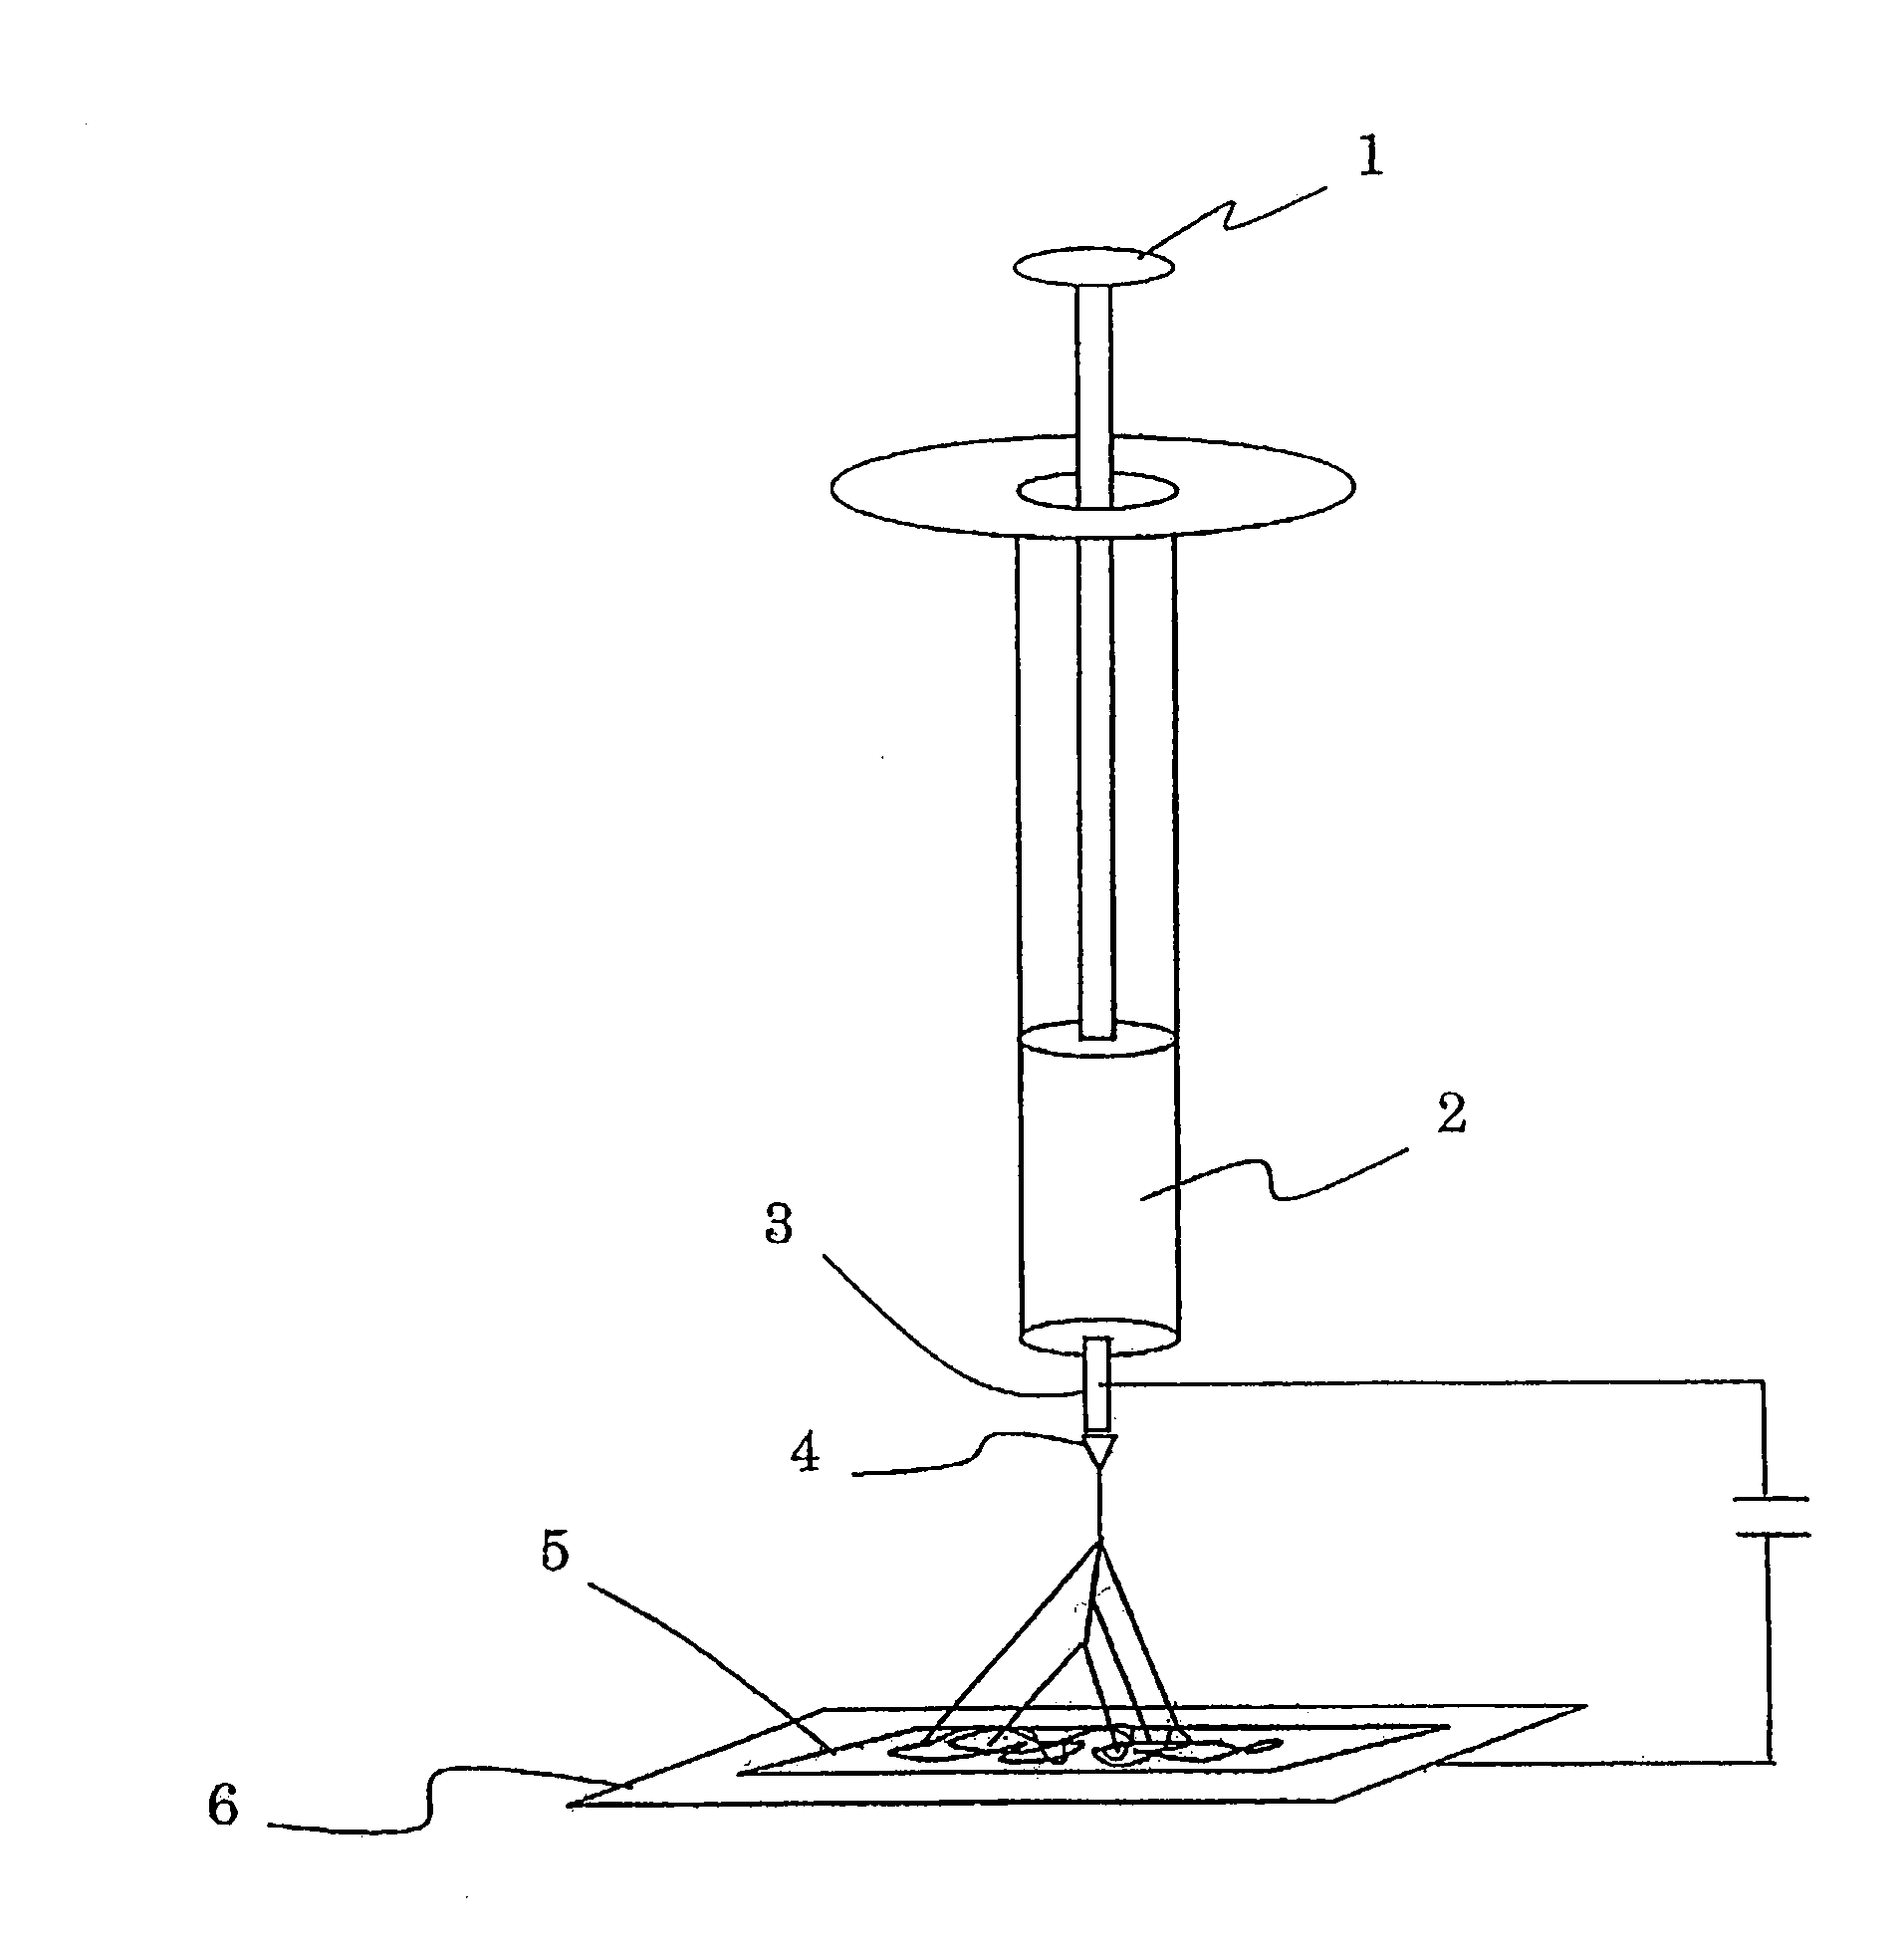 Separator for alkaline battery, method for producing the same, and battery